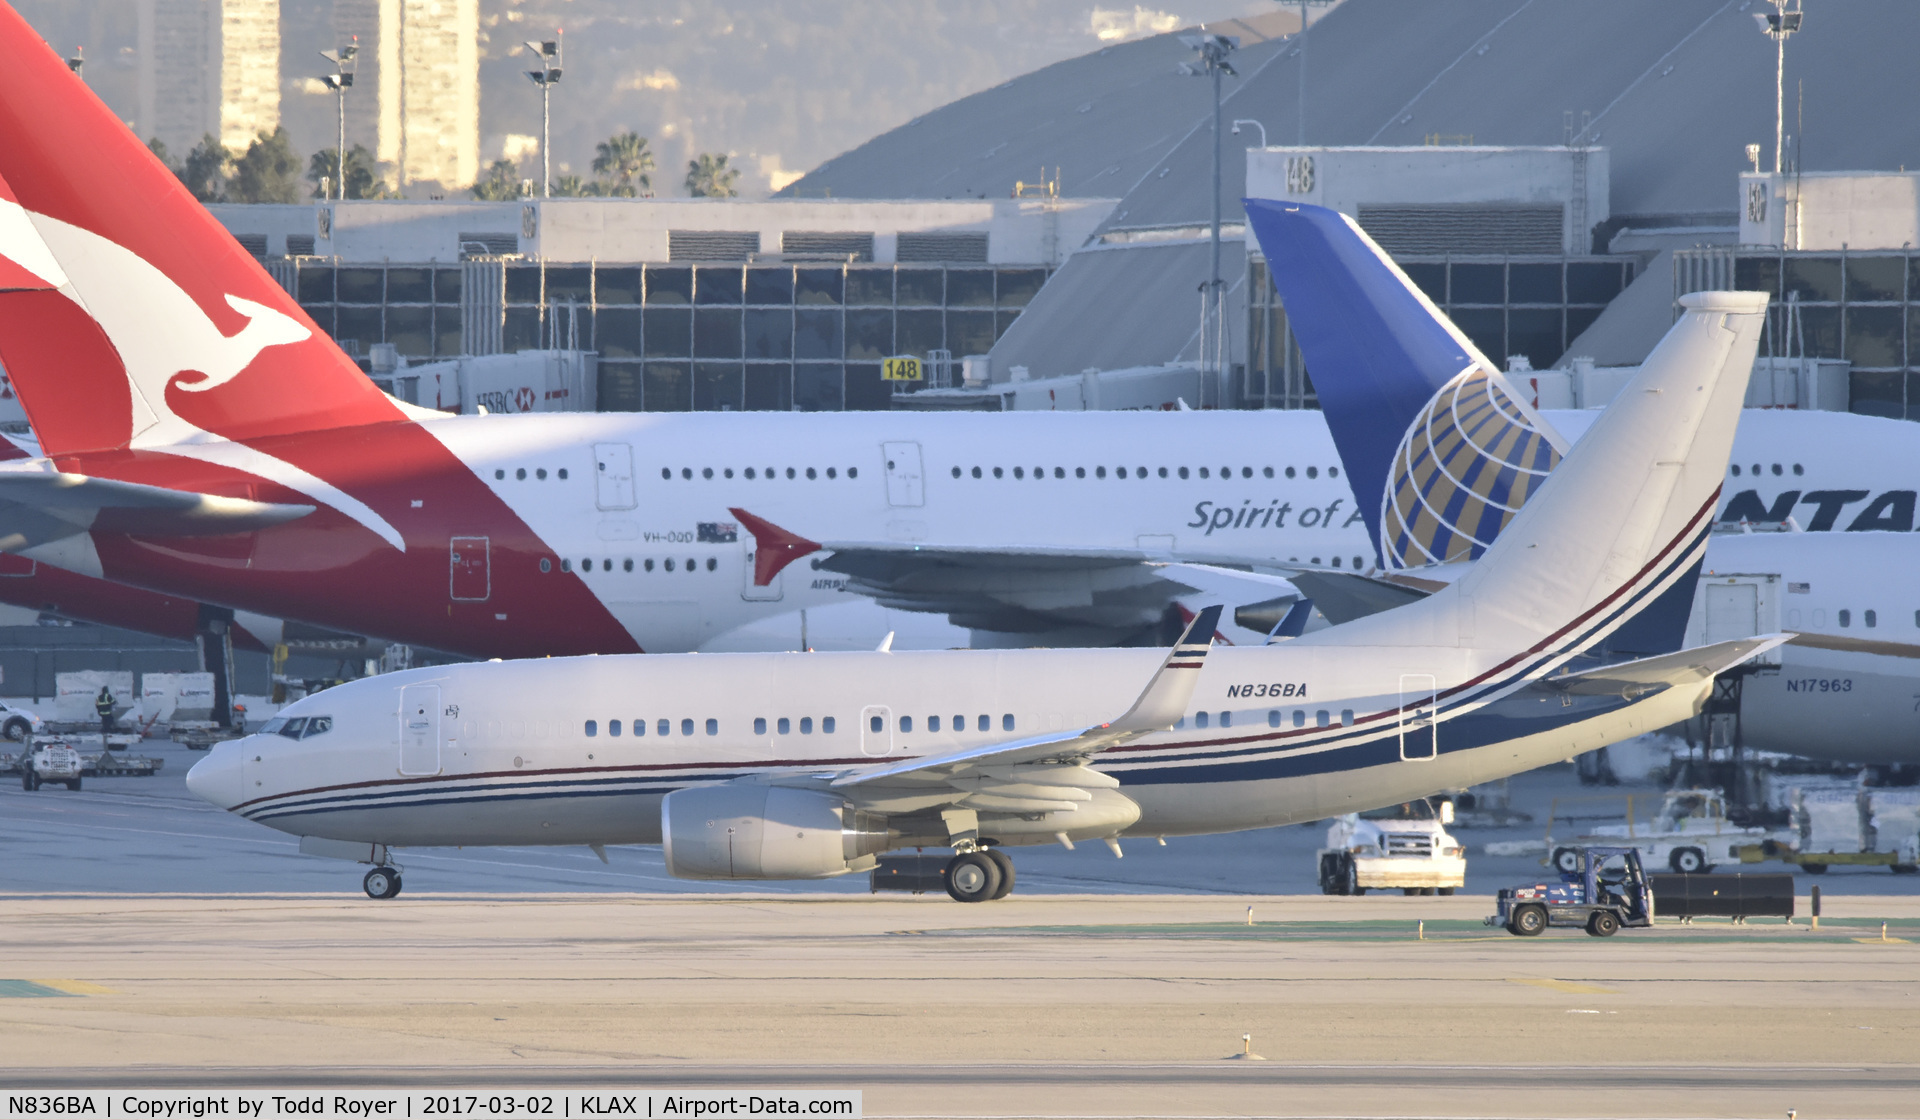 N836BA, 2000 Boeing 737-7BC C/N 30756, Taxiing for departure at LAX